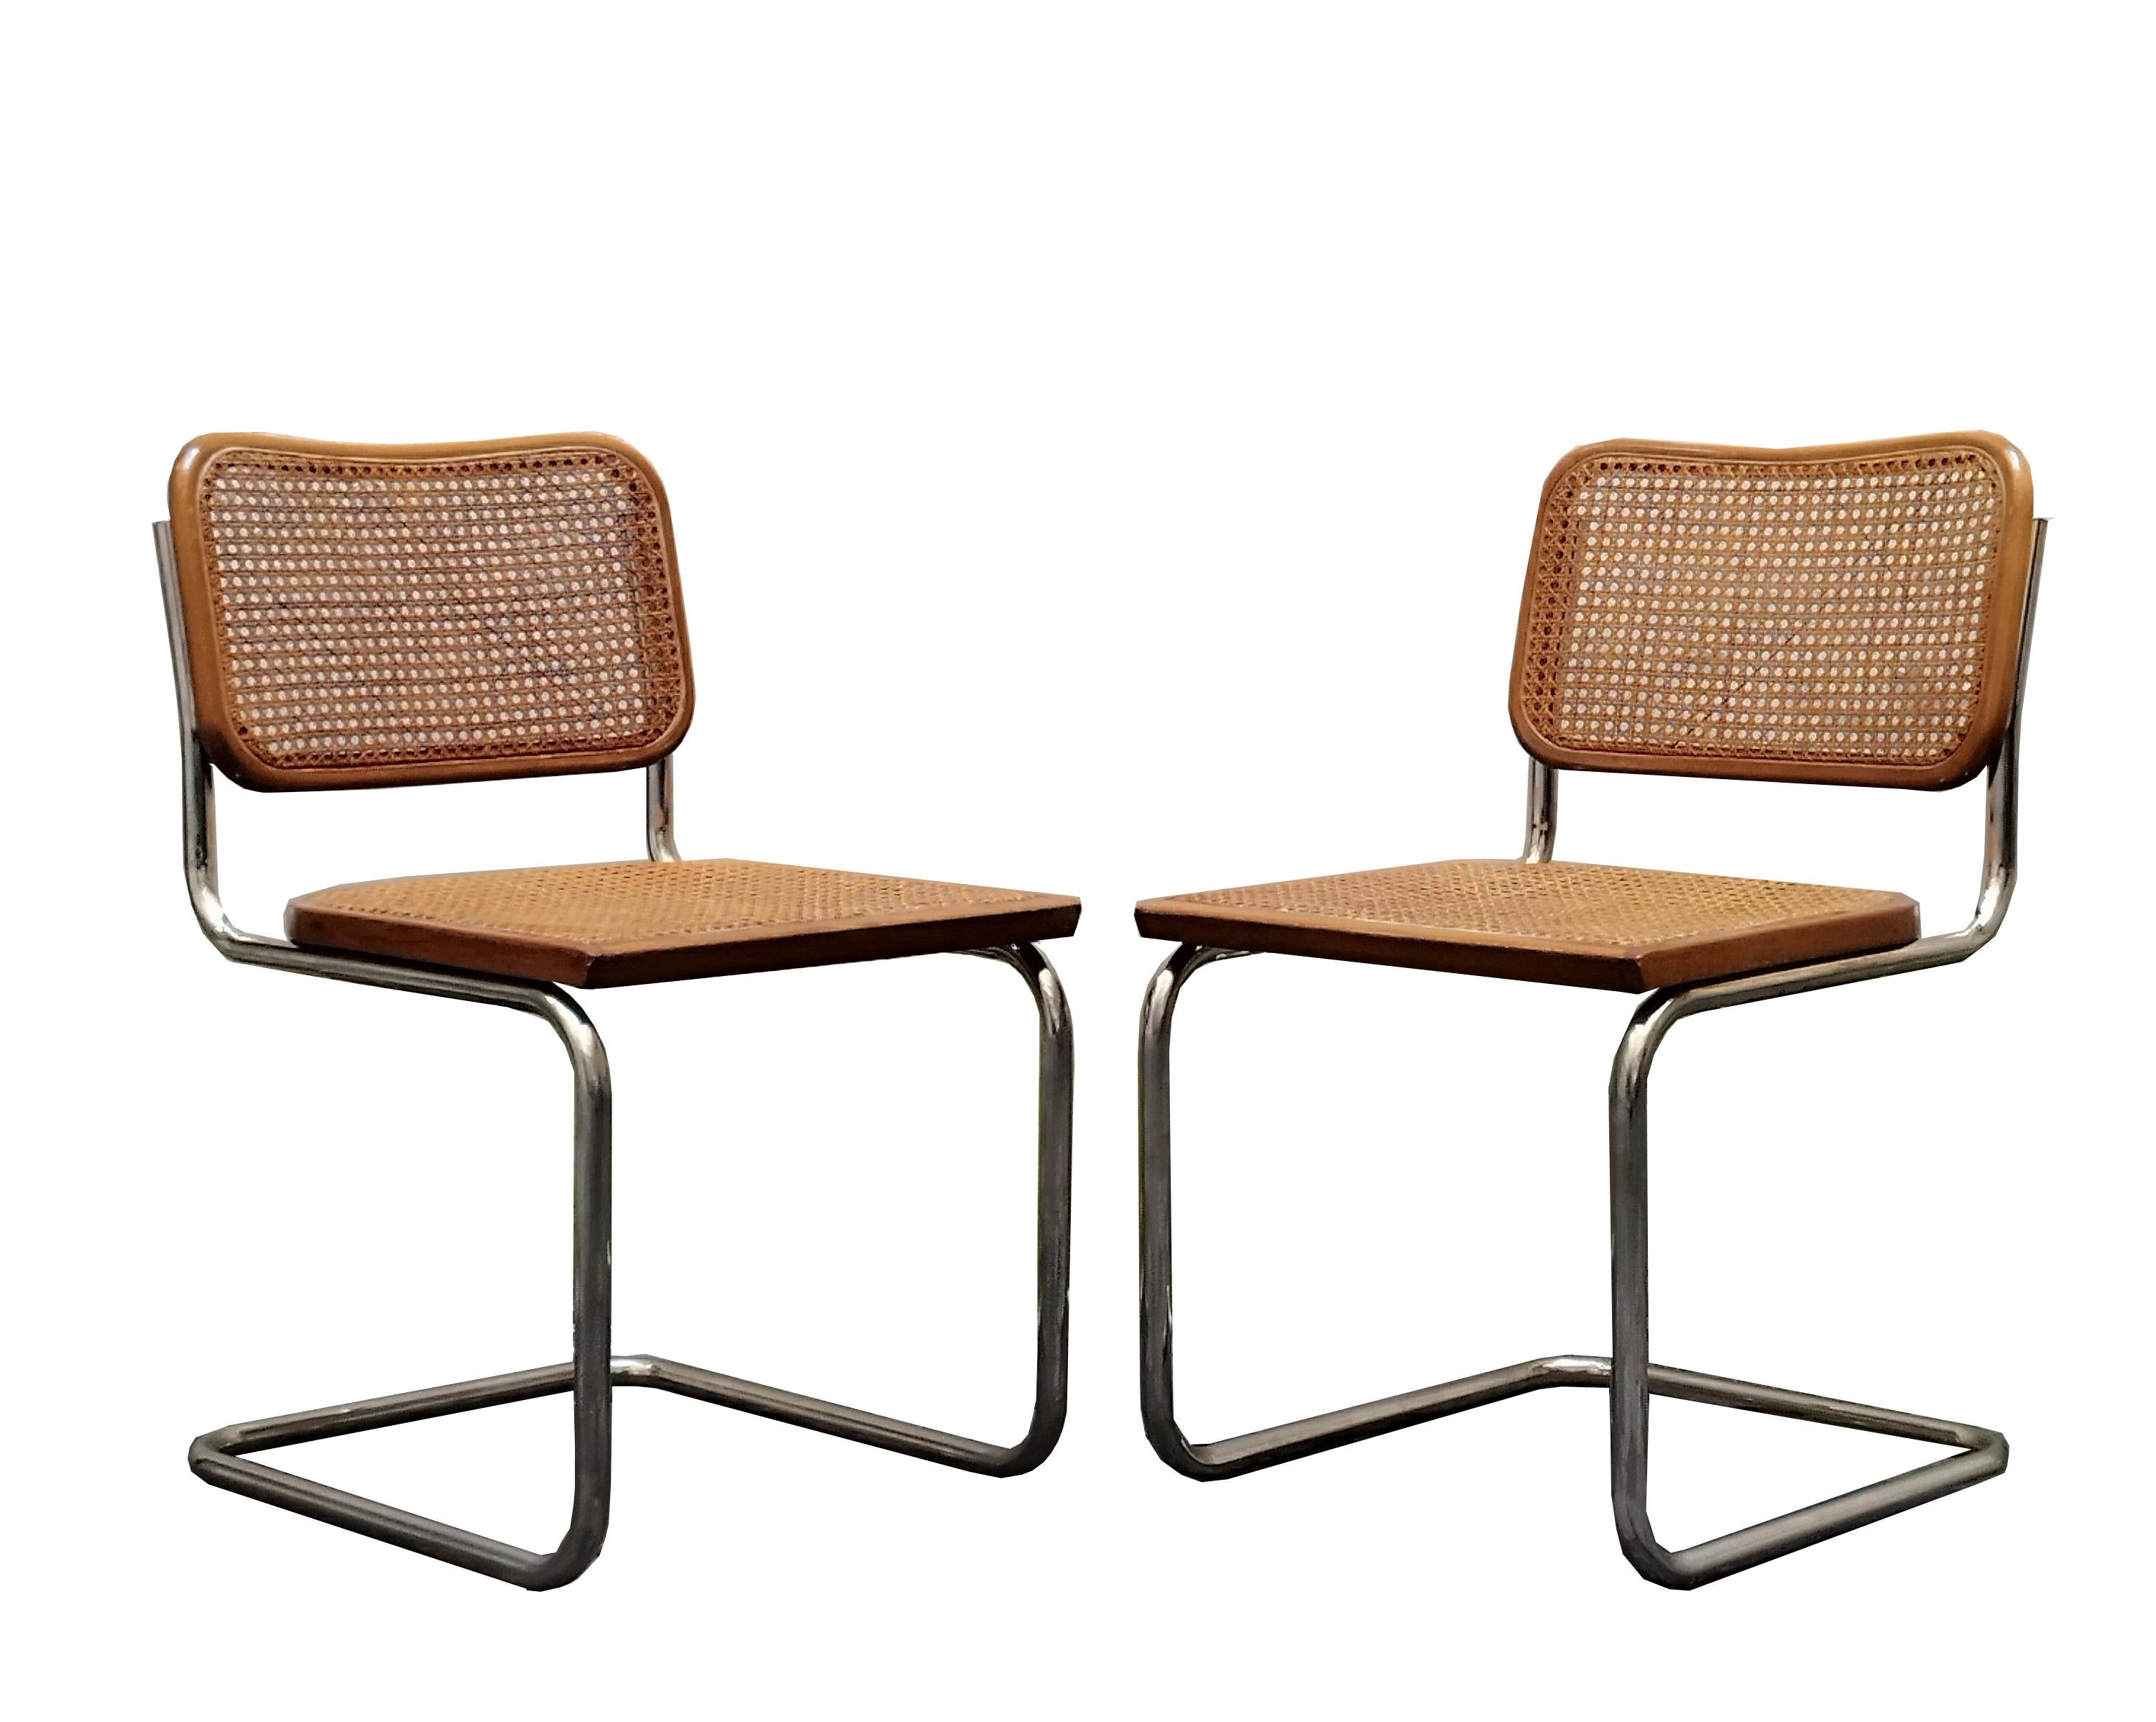 Italian Marcel Breuer Pair of Cesca Chairs, Italy, 1970s For Sale